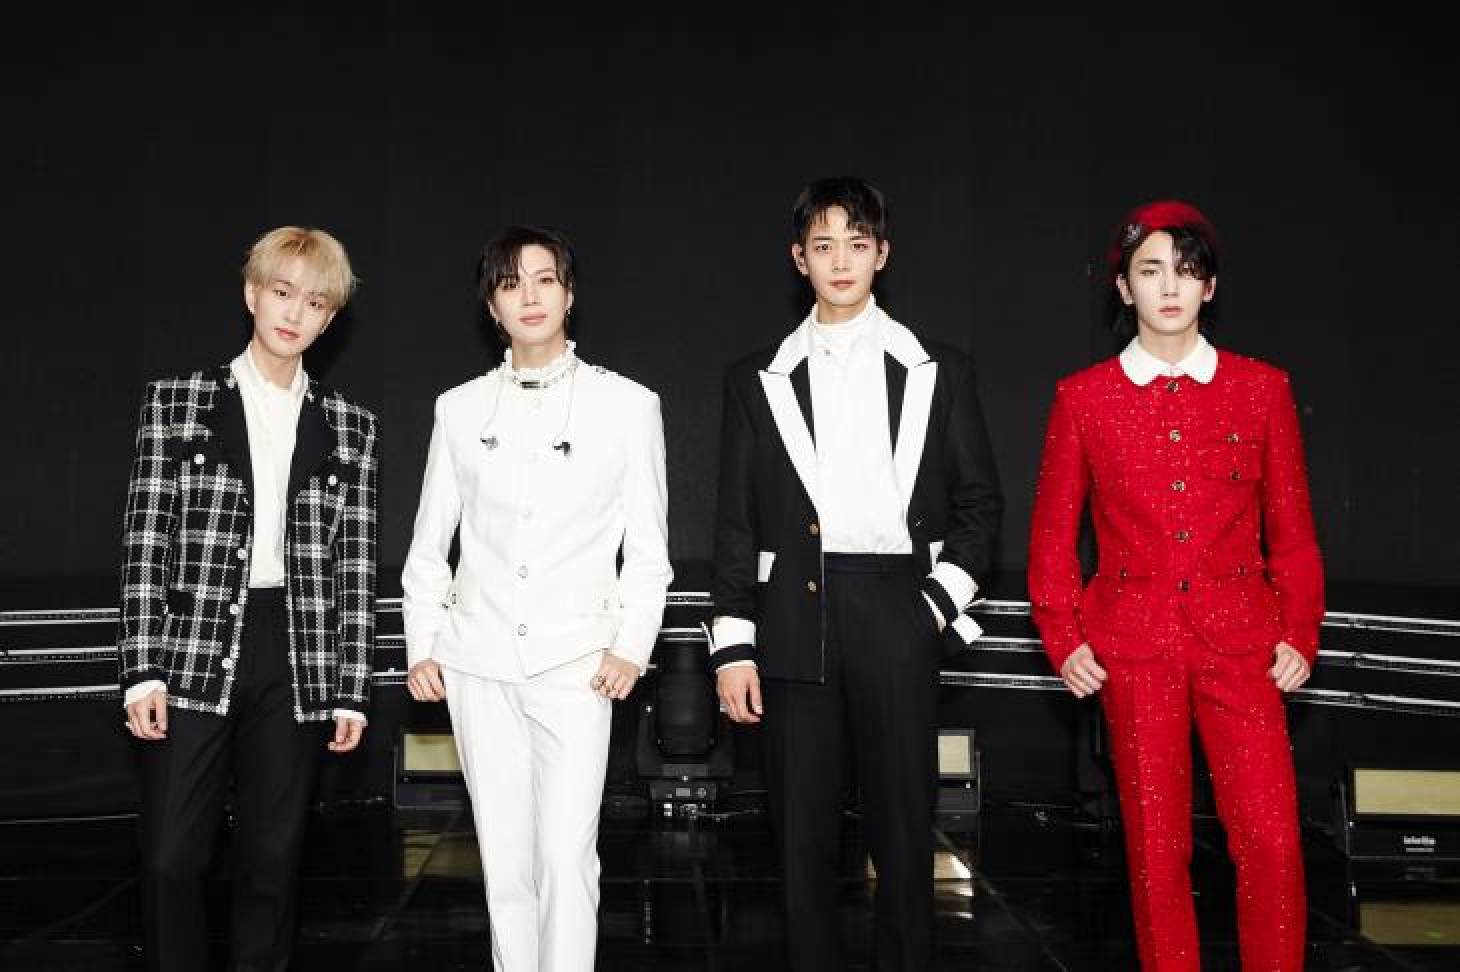 The four remaining members of Shinee are still going strong after 13 years in the industry. Photo: @SHINee/Twitter